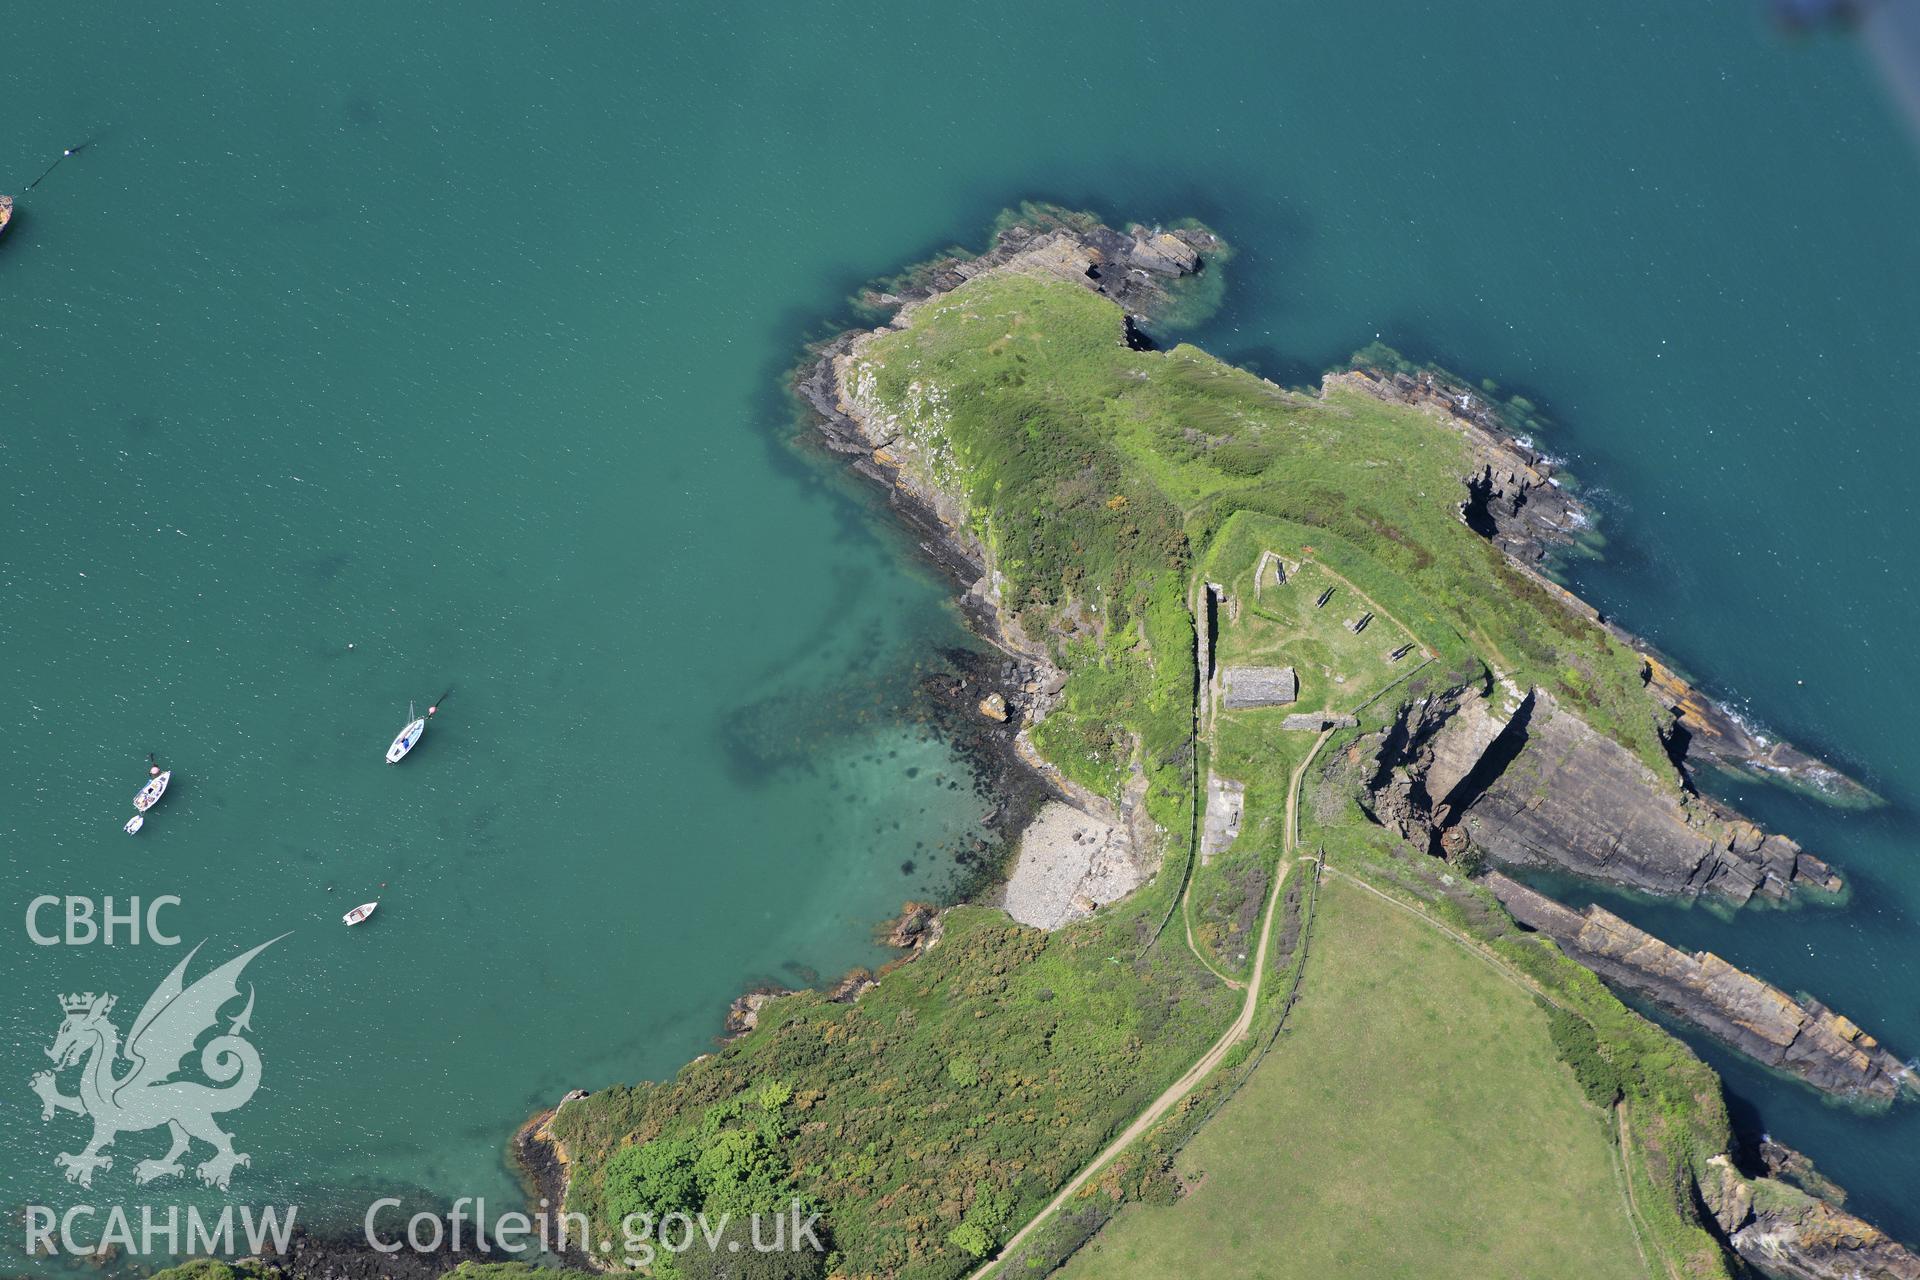 RCAHMW colour oblique aerial photograph of Castle Point Old Fort. Taken on 01 June 2009 by Toby Driver